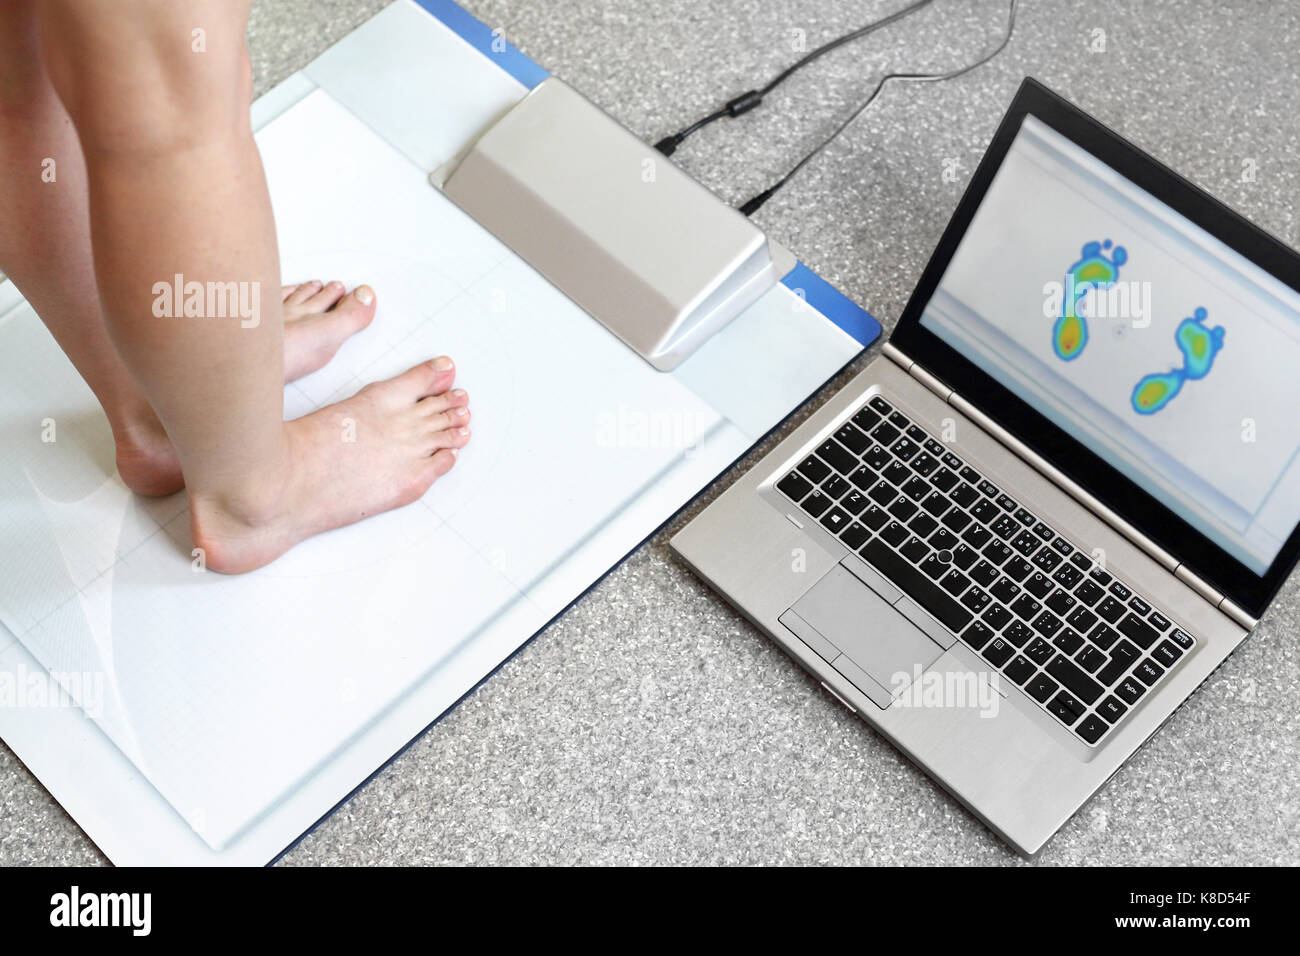 Platypus, orthopedic woman. Female feet during a podoscopic examination in an orthopedic surgery. Stock Photo